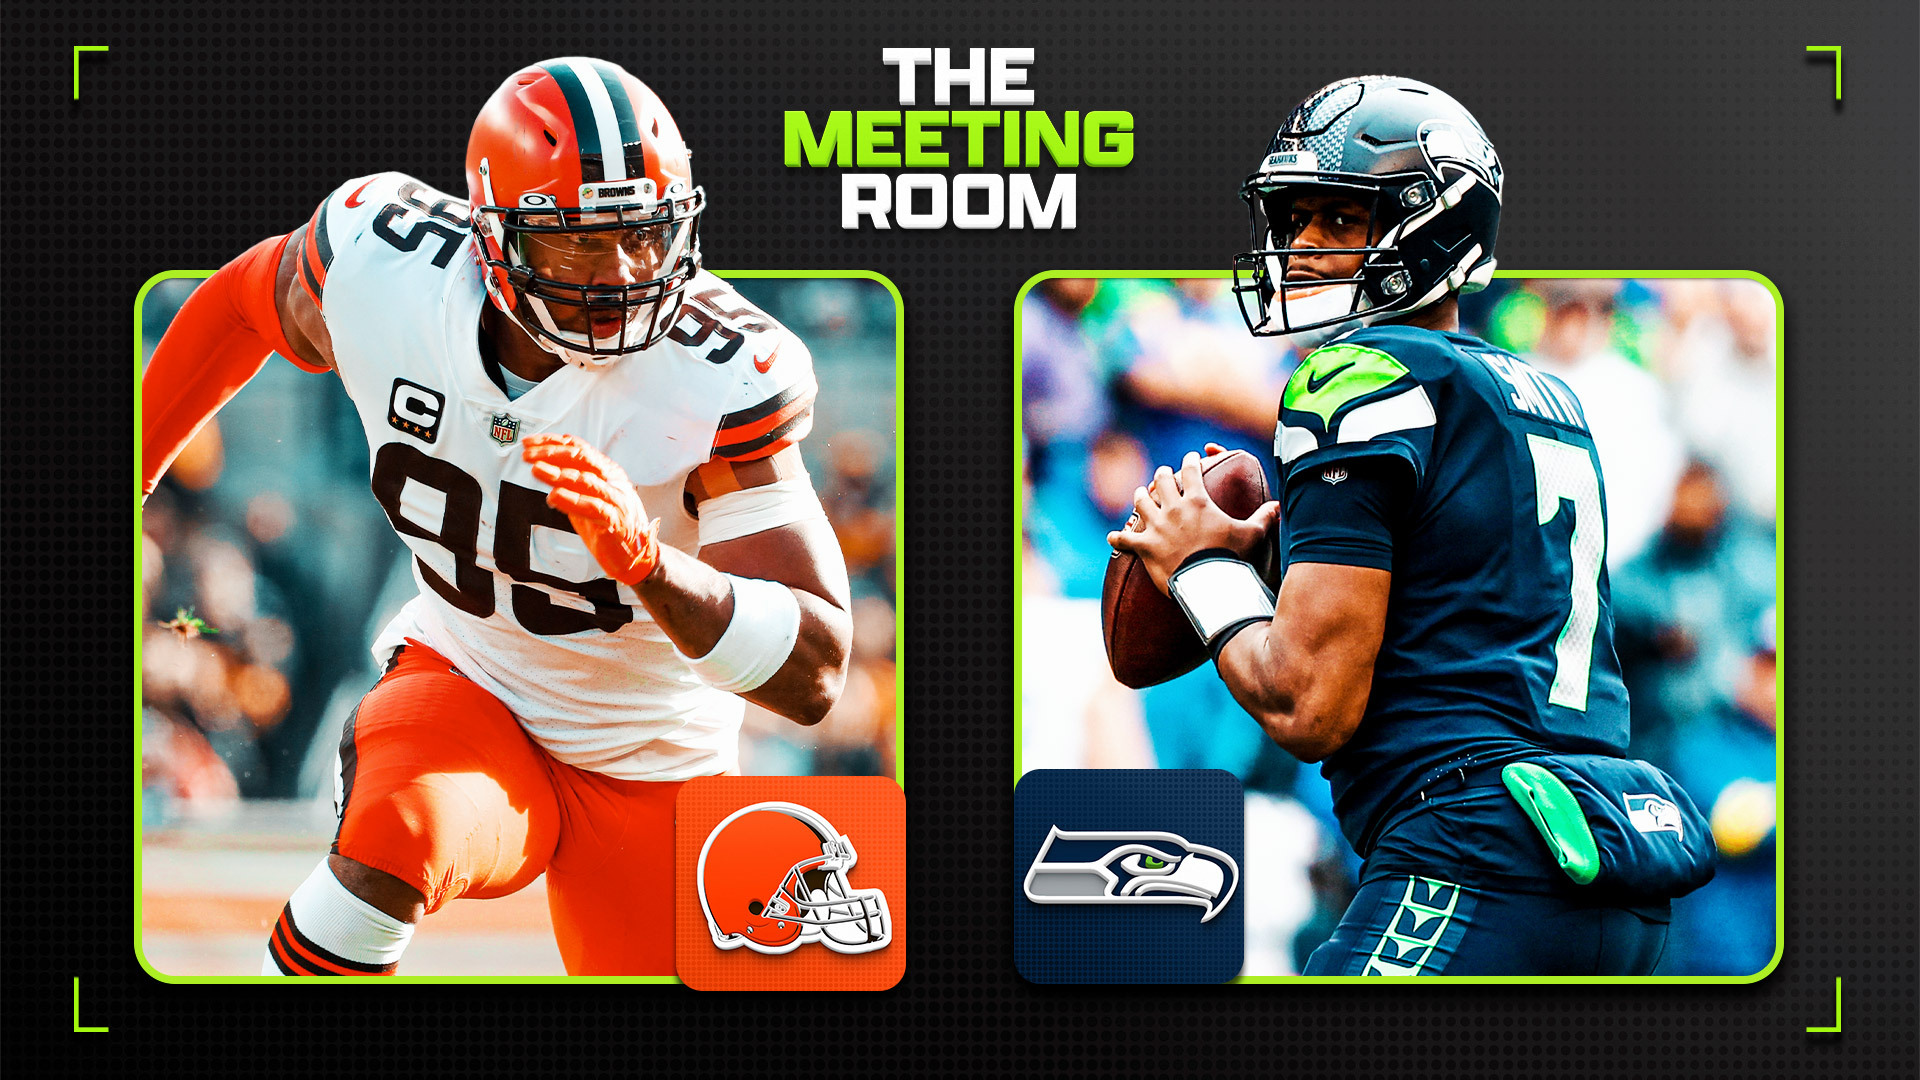 The Meeting Room graphic featuring Myles Garrett on the left and Geno Smith on the right